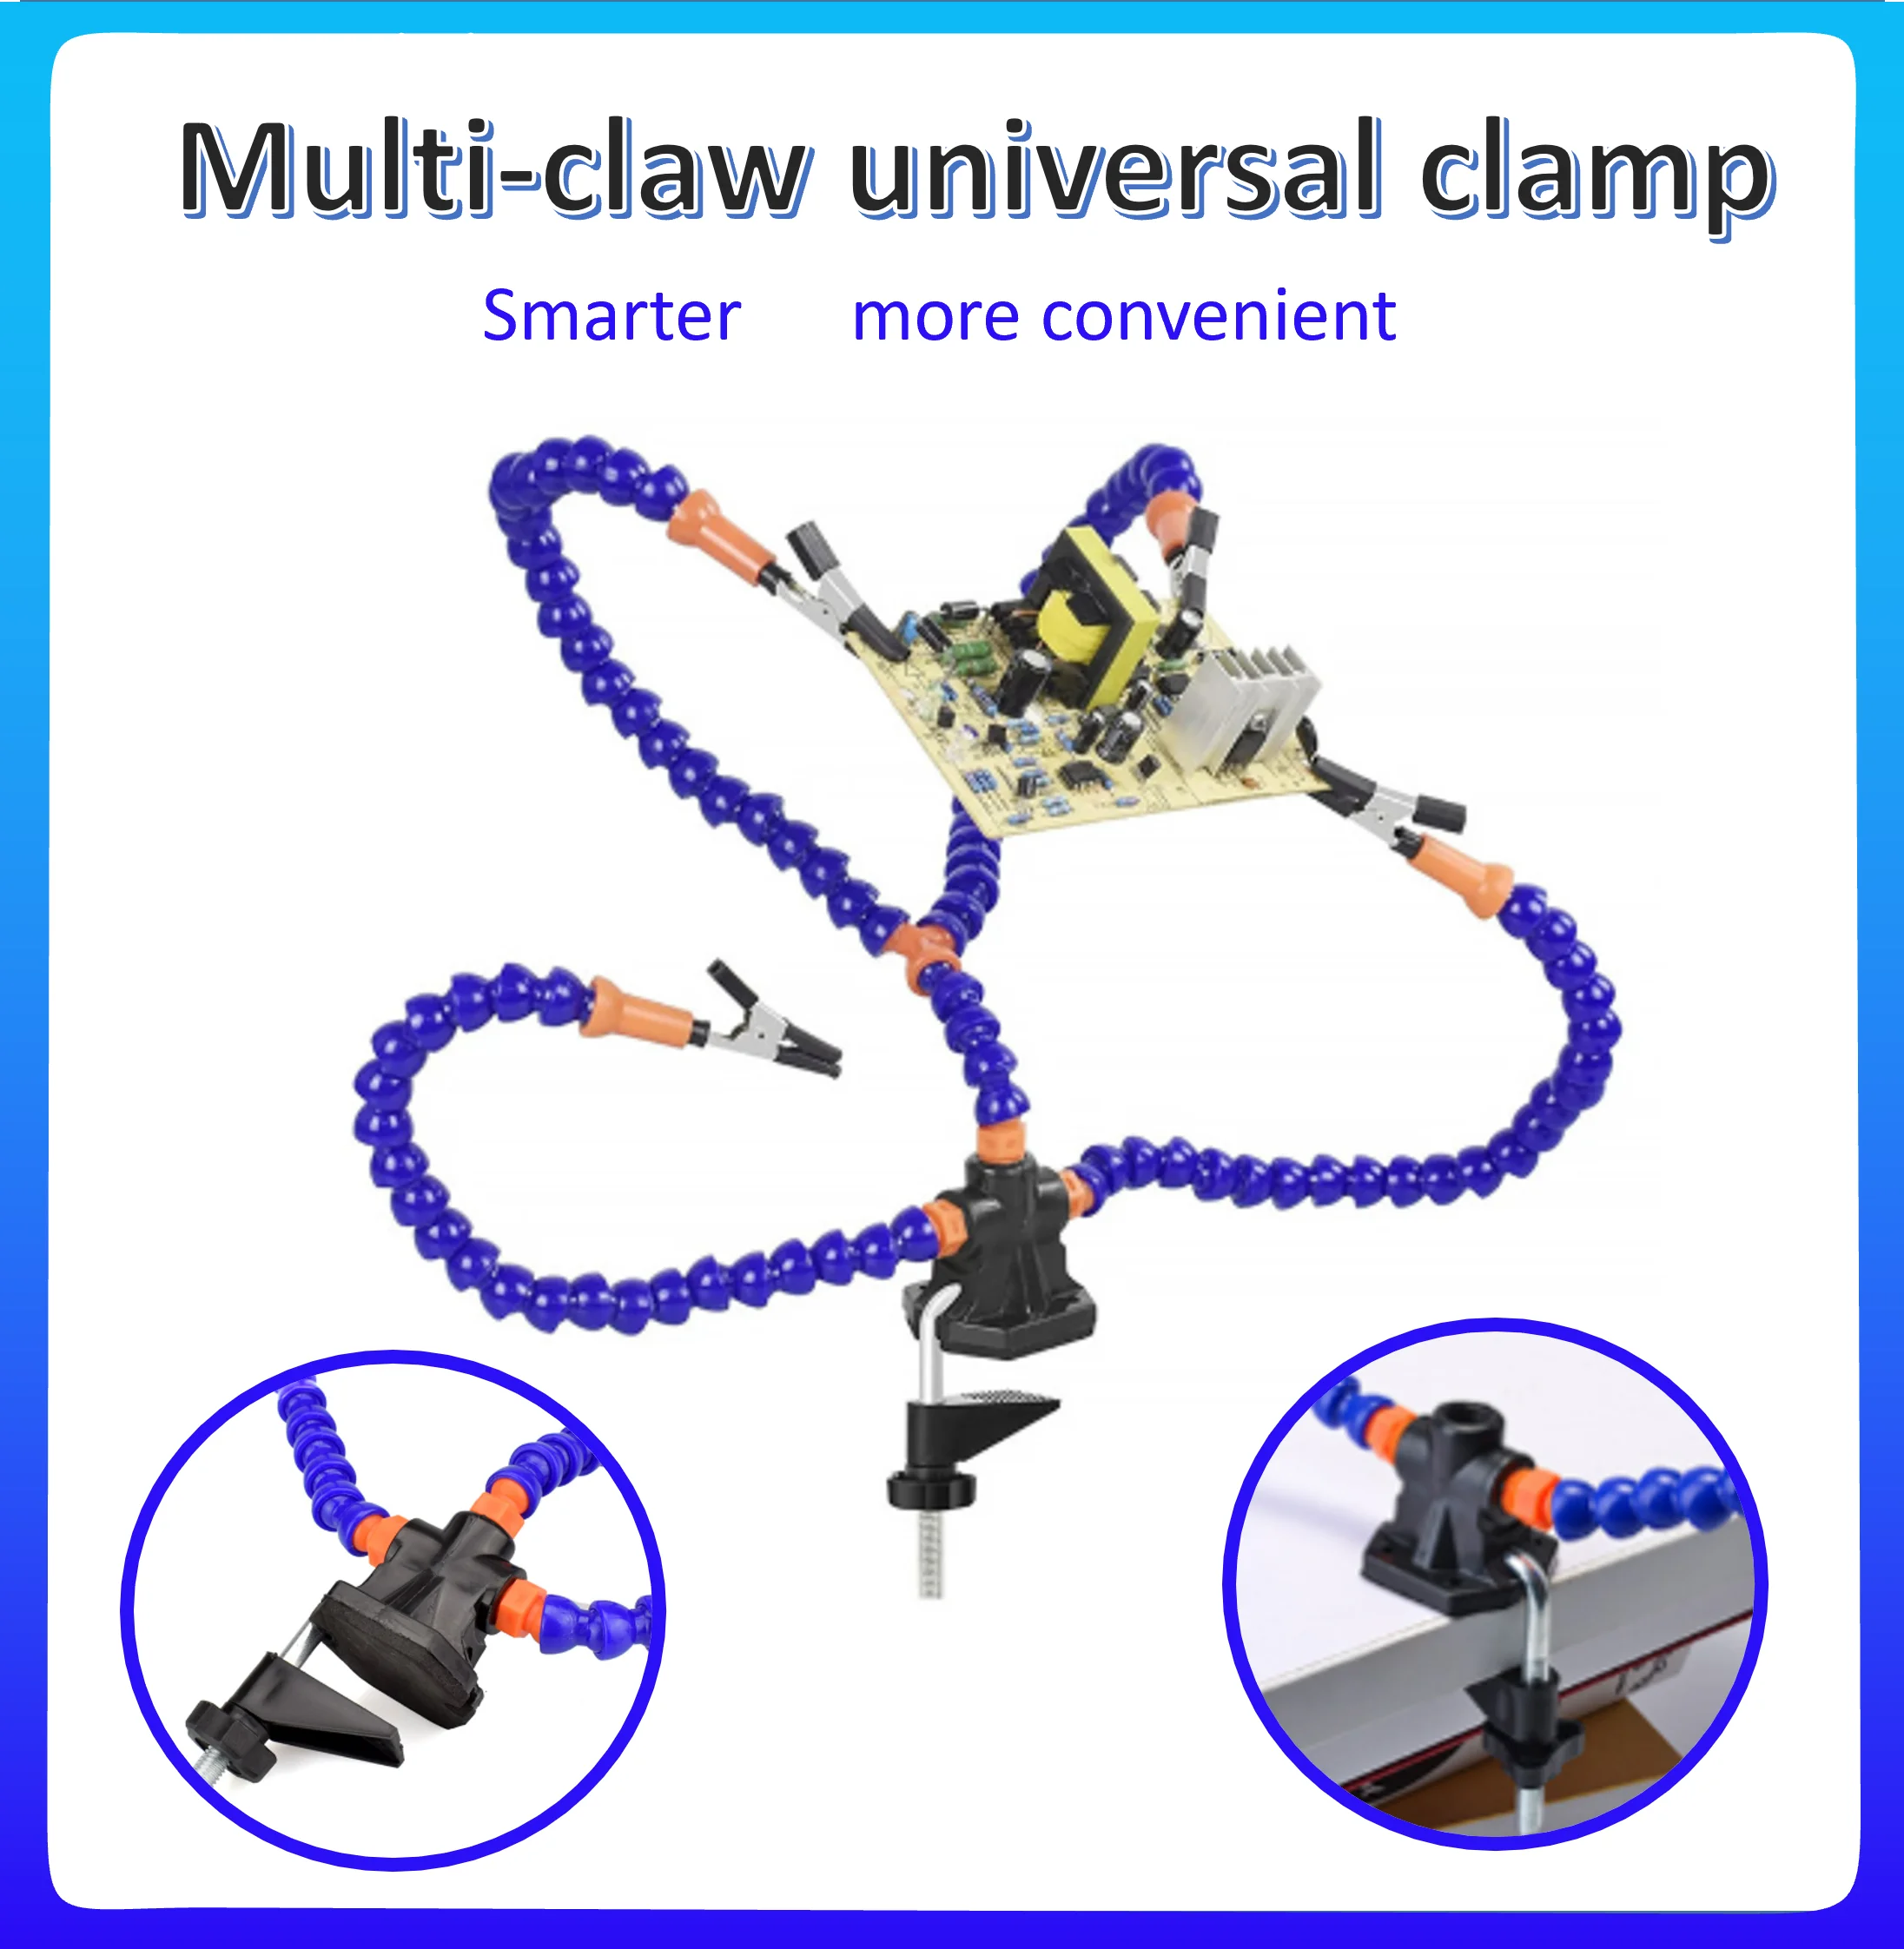 

Multi-function Multi-claw simple welding table flexible universal arm DIY welding PCB repair circuit board clamp auxiliary tool